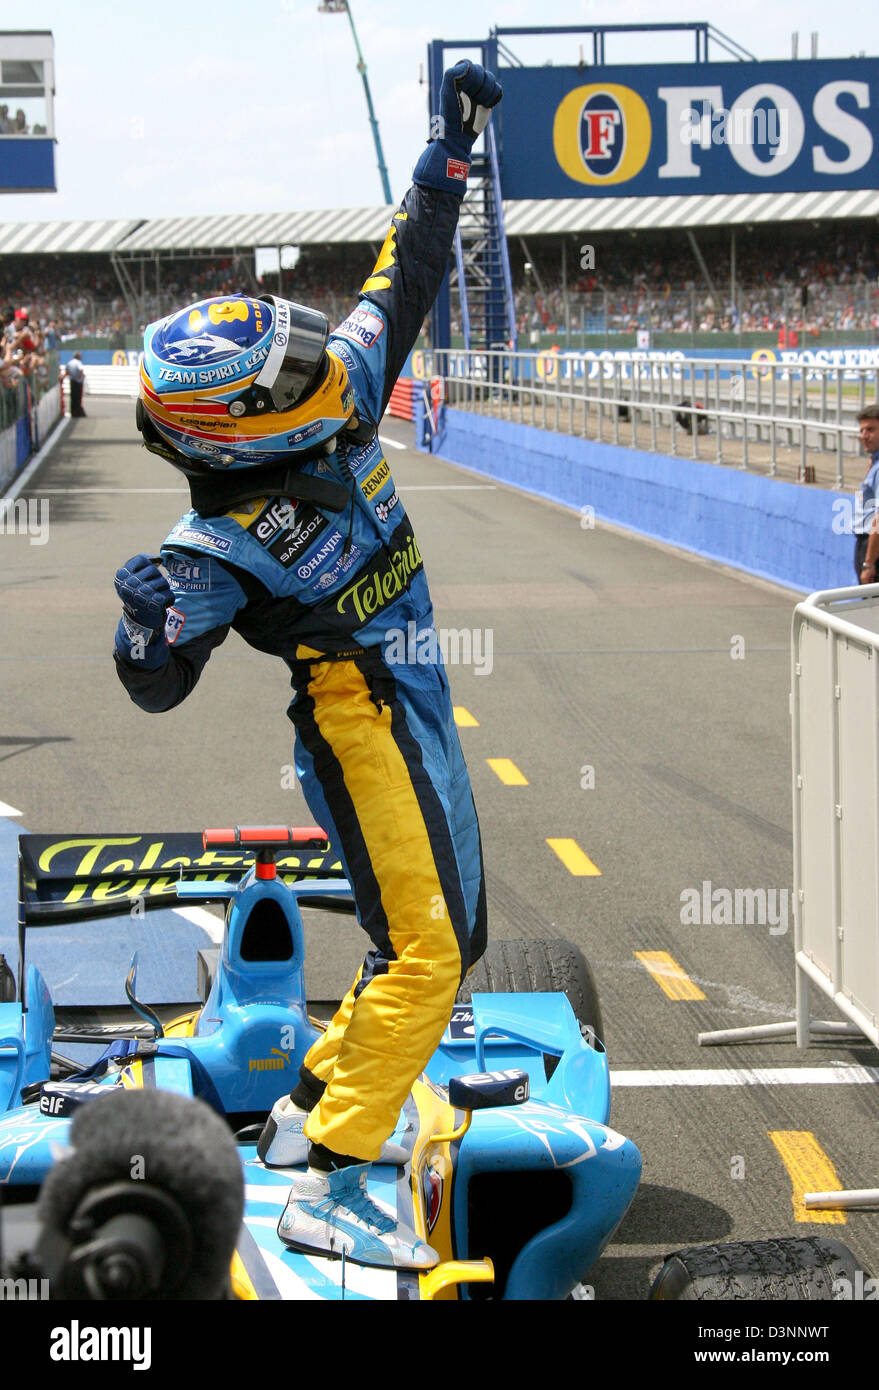 Spanish Formula One driver Fernando Alonso of the Renault F1 team  celebrates after winning the British Grand Prix at the Silverstone race  track in Northamptonshire, Great Britain, Sunday, 11 June 2006. Photo: